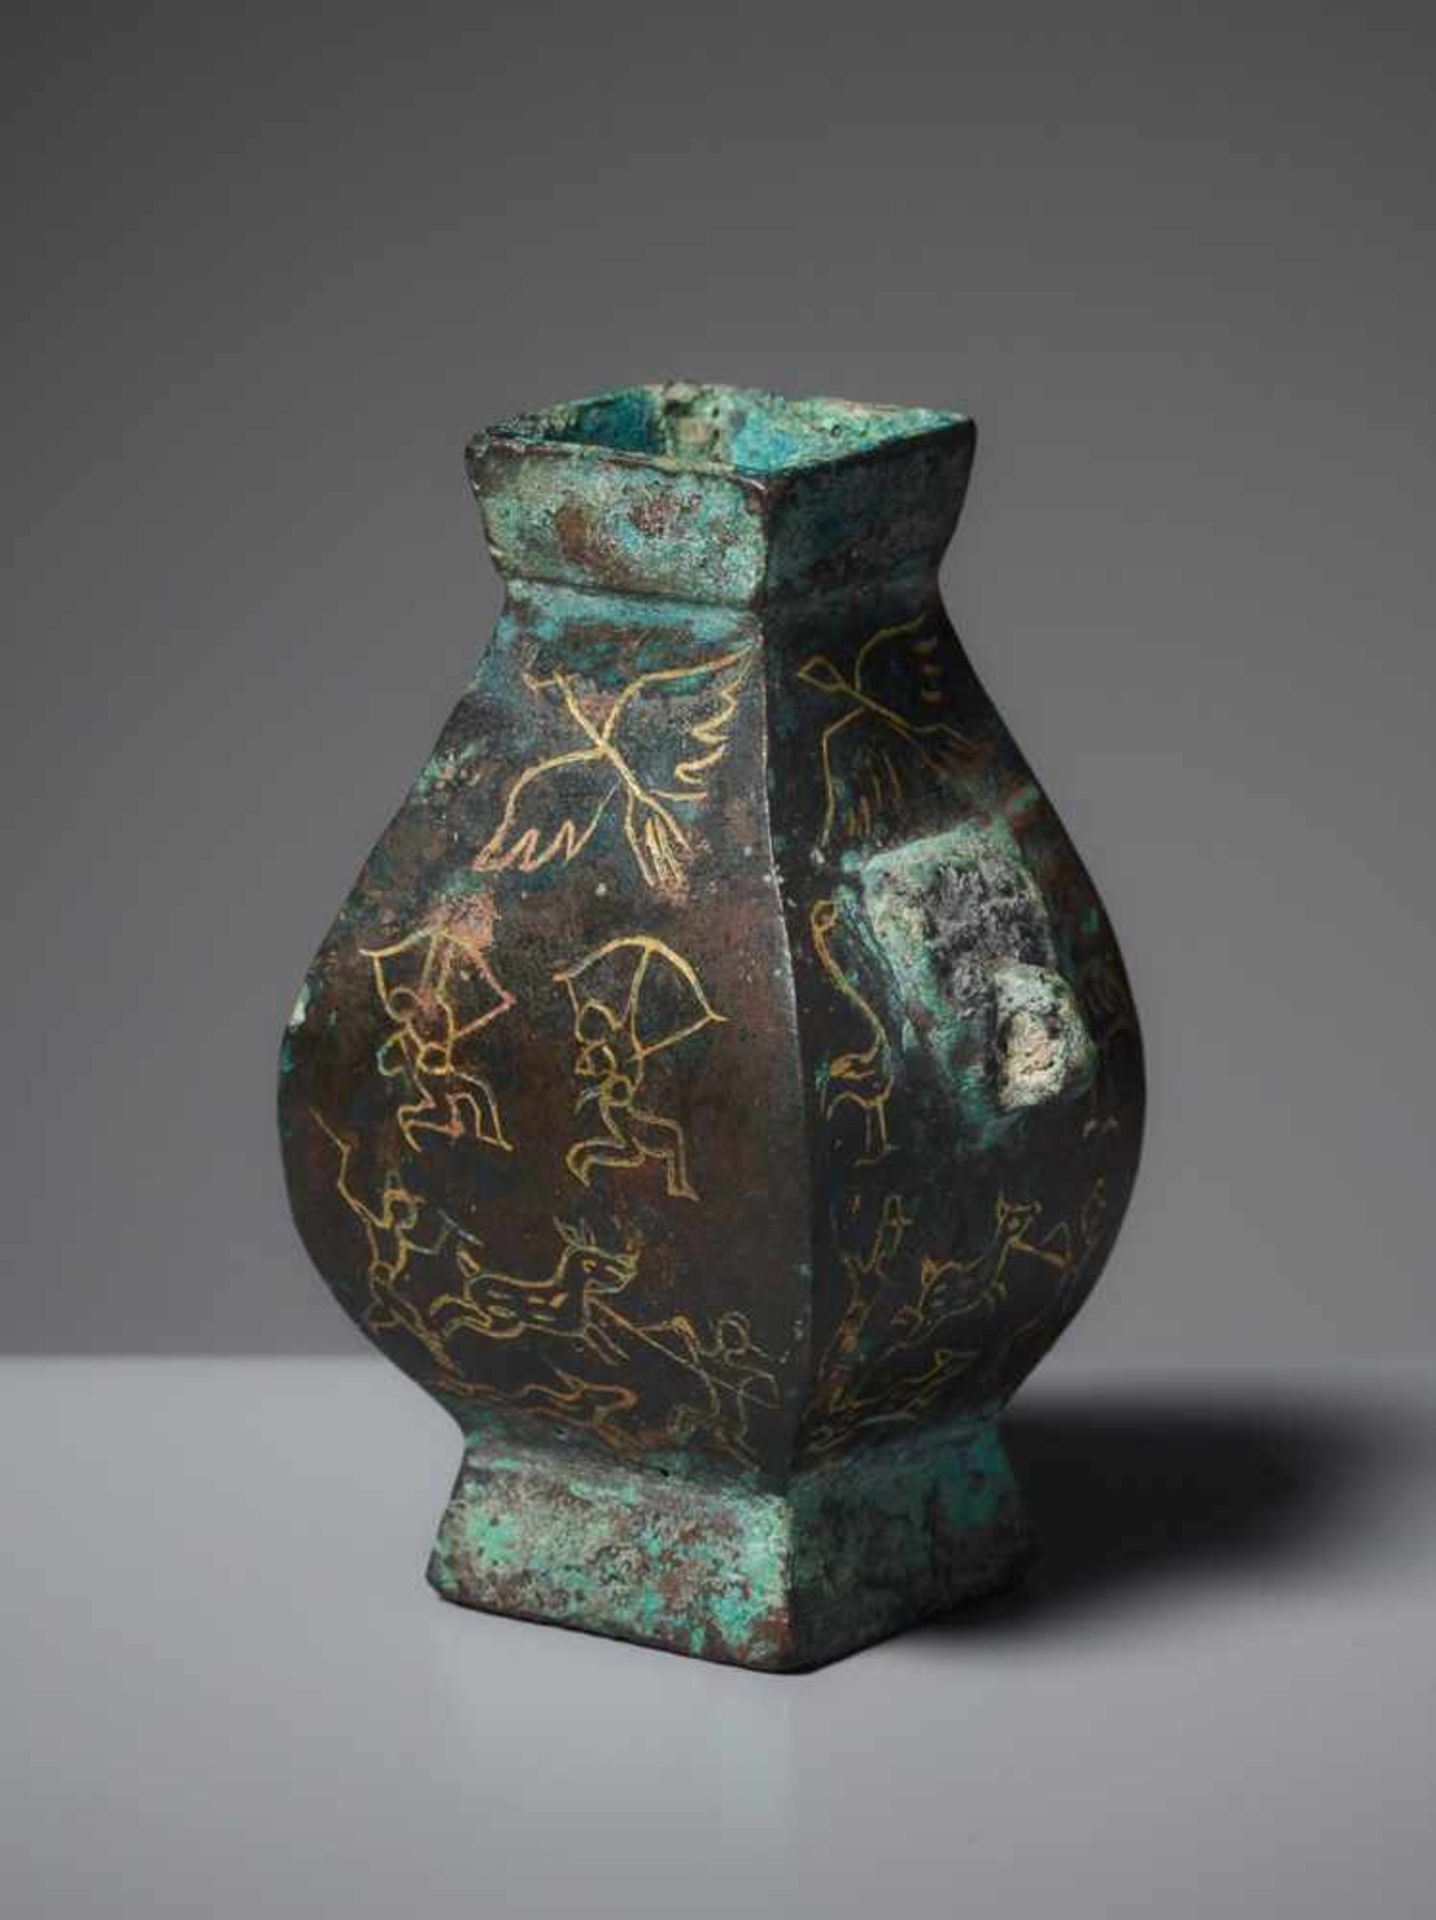 VESSEL FANGHUBronze and GoldChina, Han dynasty (pre-206 - 220)An extremely rare, small, archaic